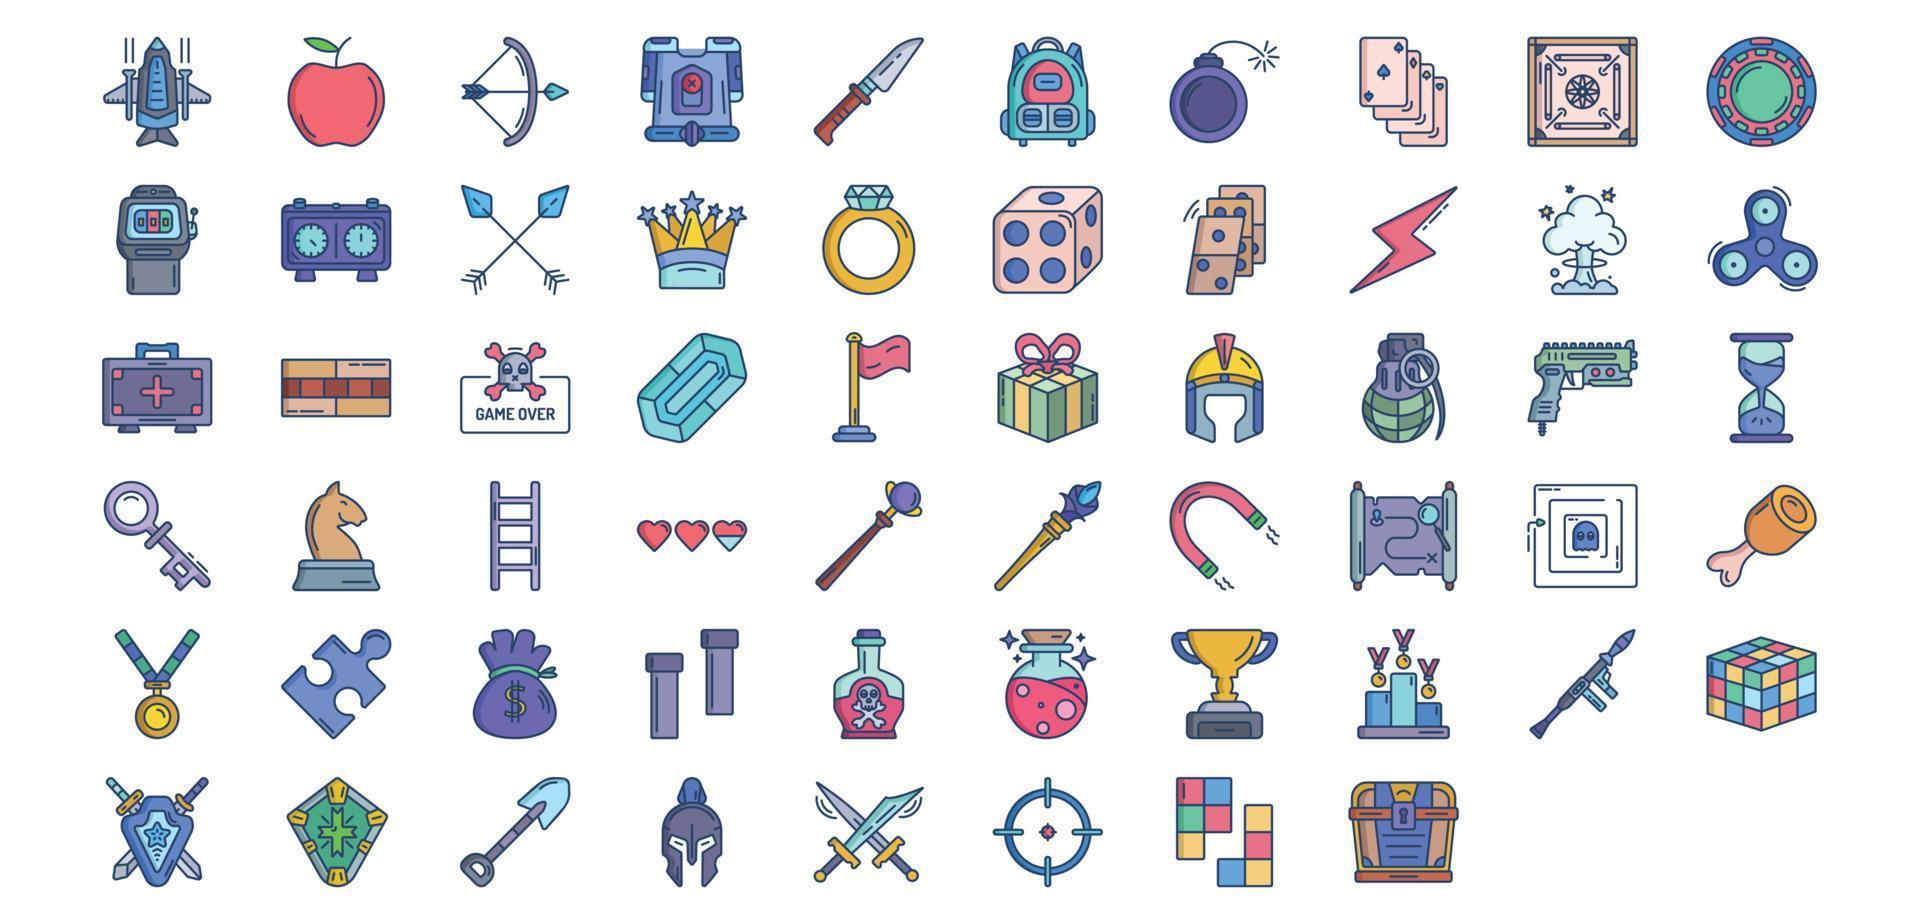 Collection of icons related to Video Game Elements, including icons like Airplane, Armor, Crown, Dice and more. vector illustrations, Pixel Perfect set